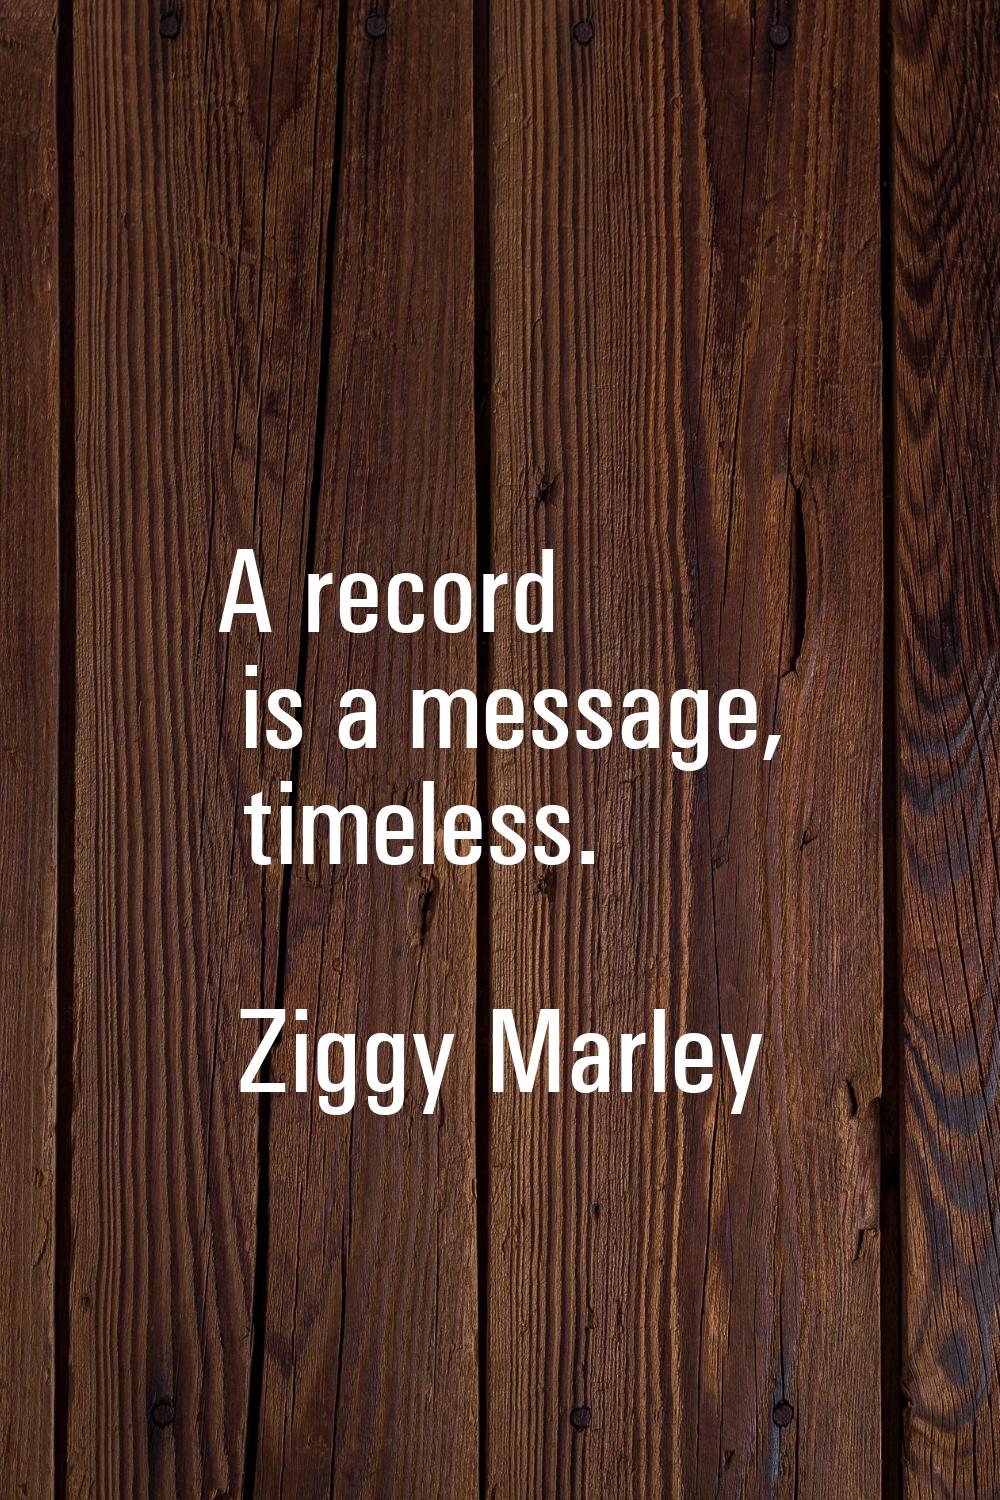 A record is a message, timeless.